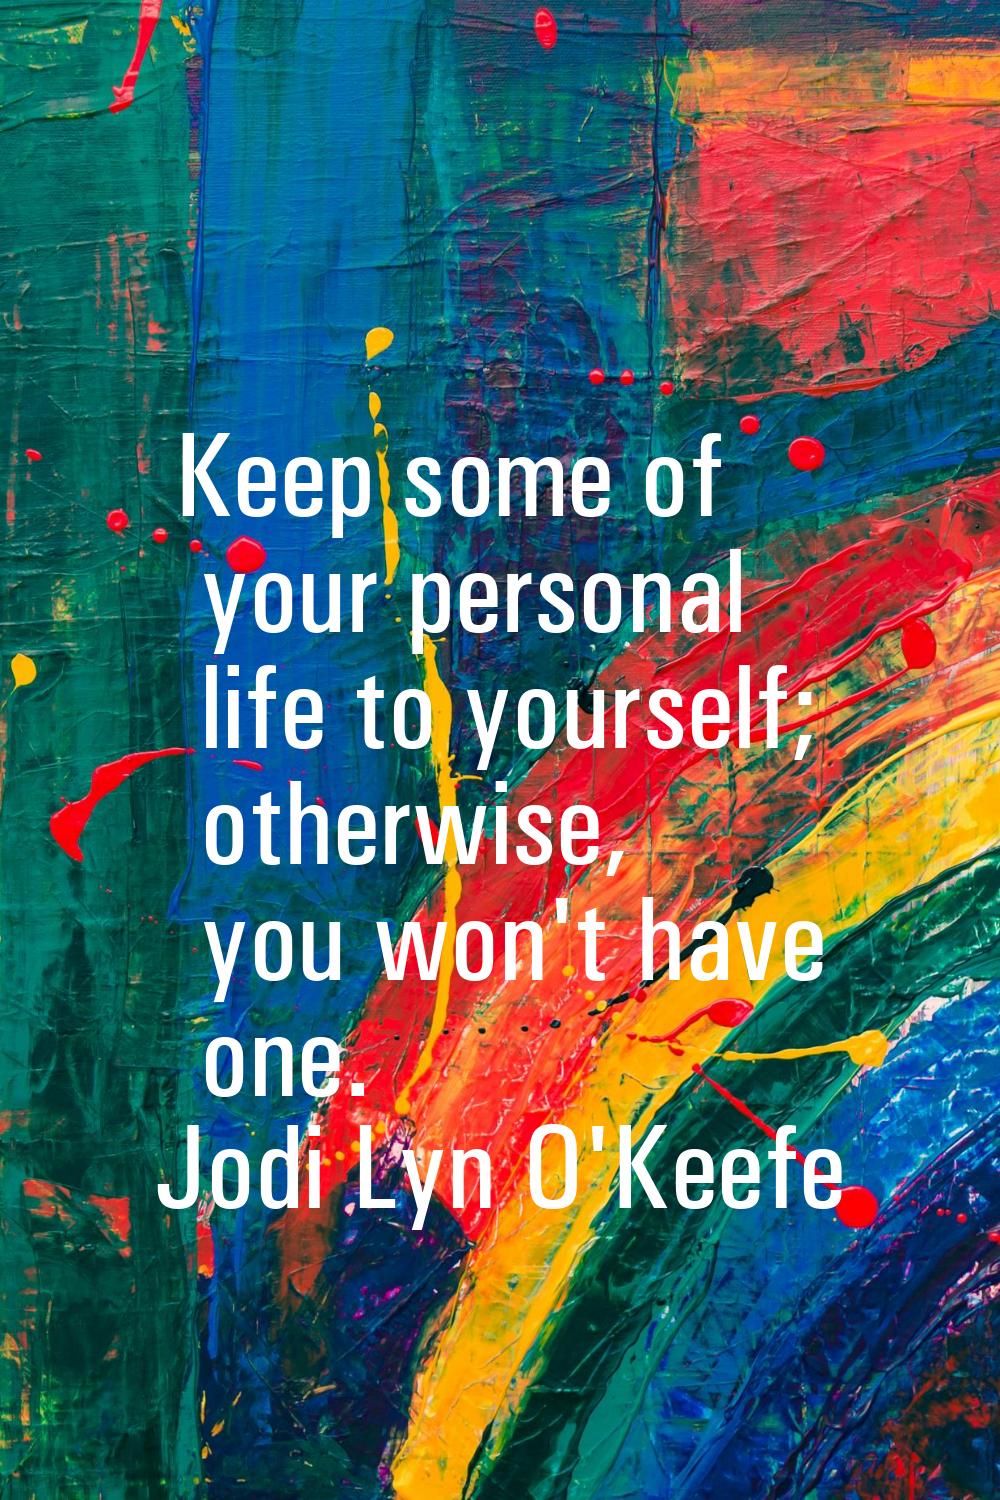 Keep some of your personal life to yourself; otherwise, you won't have one.